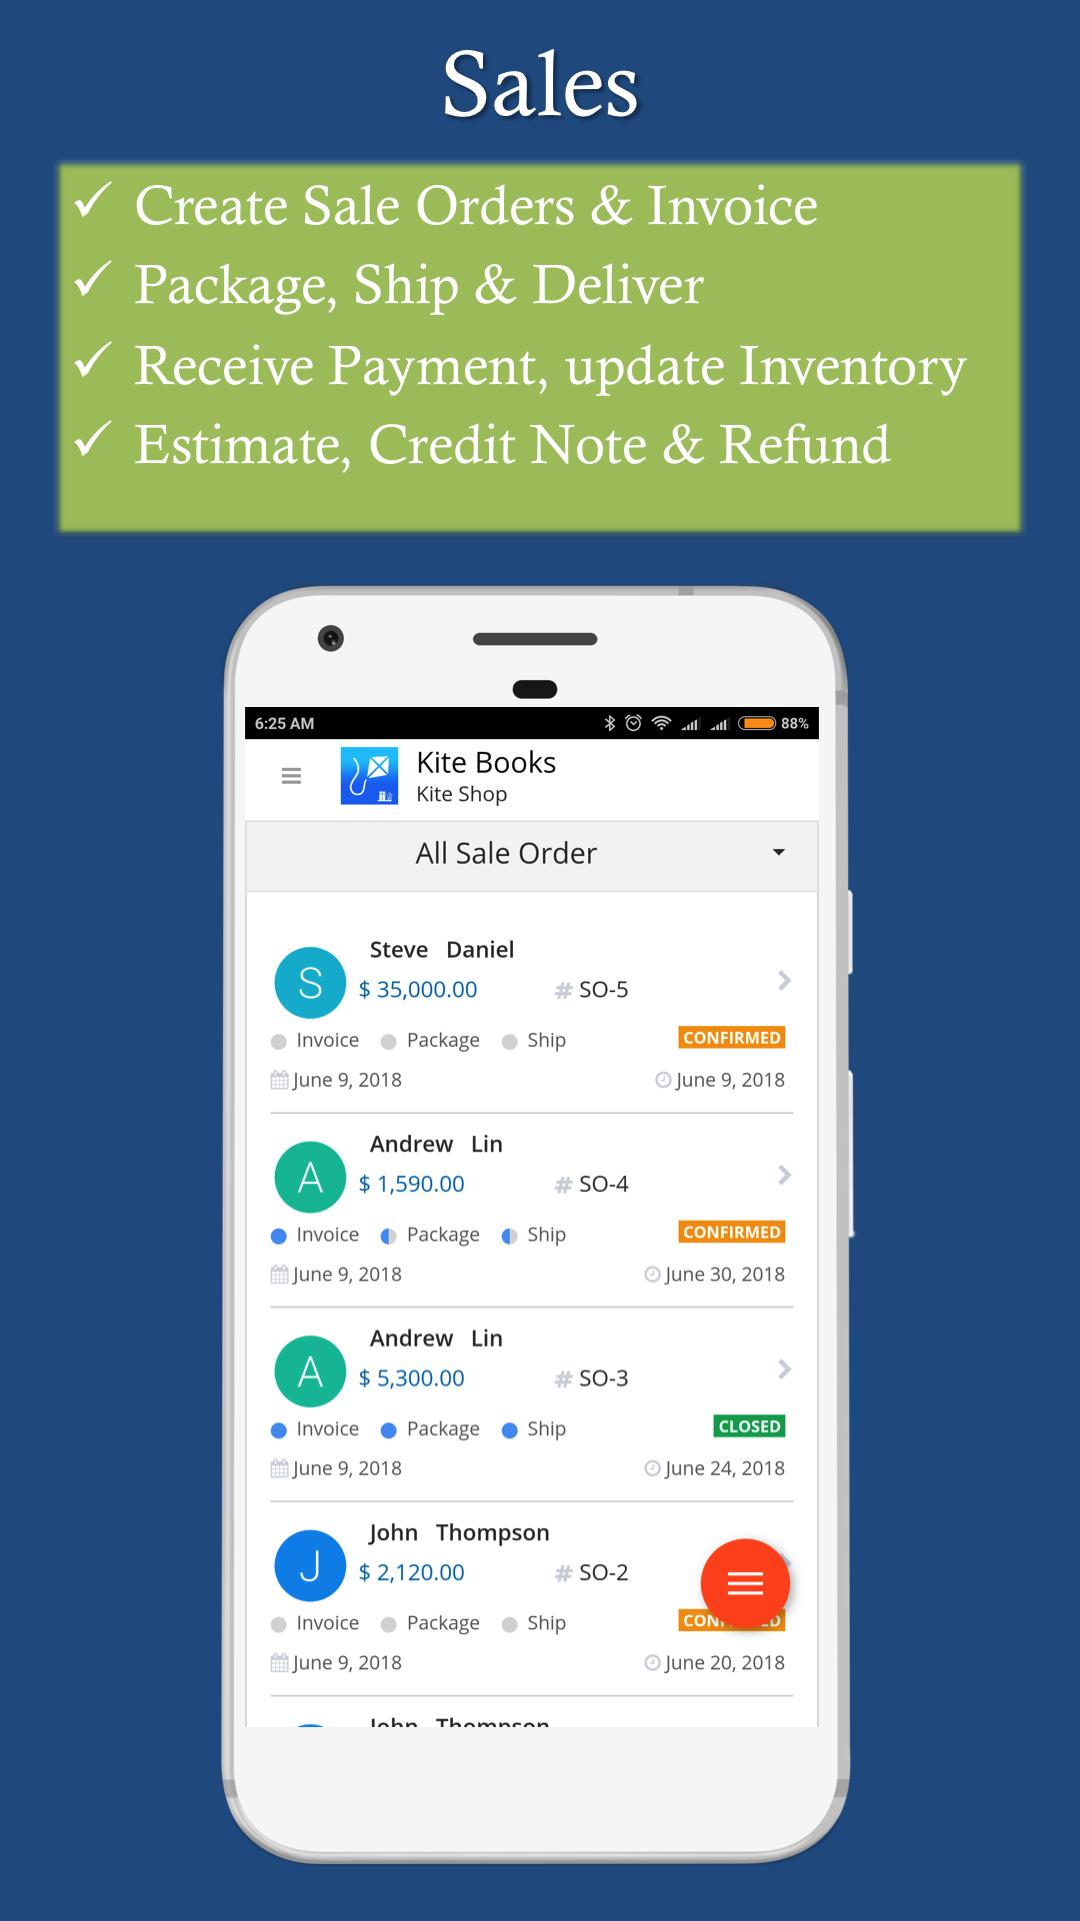 Free Invoice Inventory Management App Kite Books For Android Apk Download